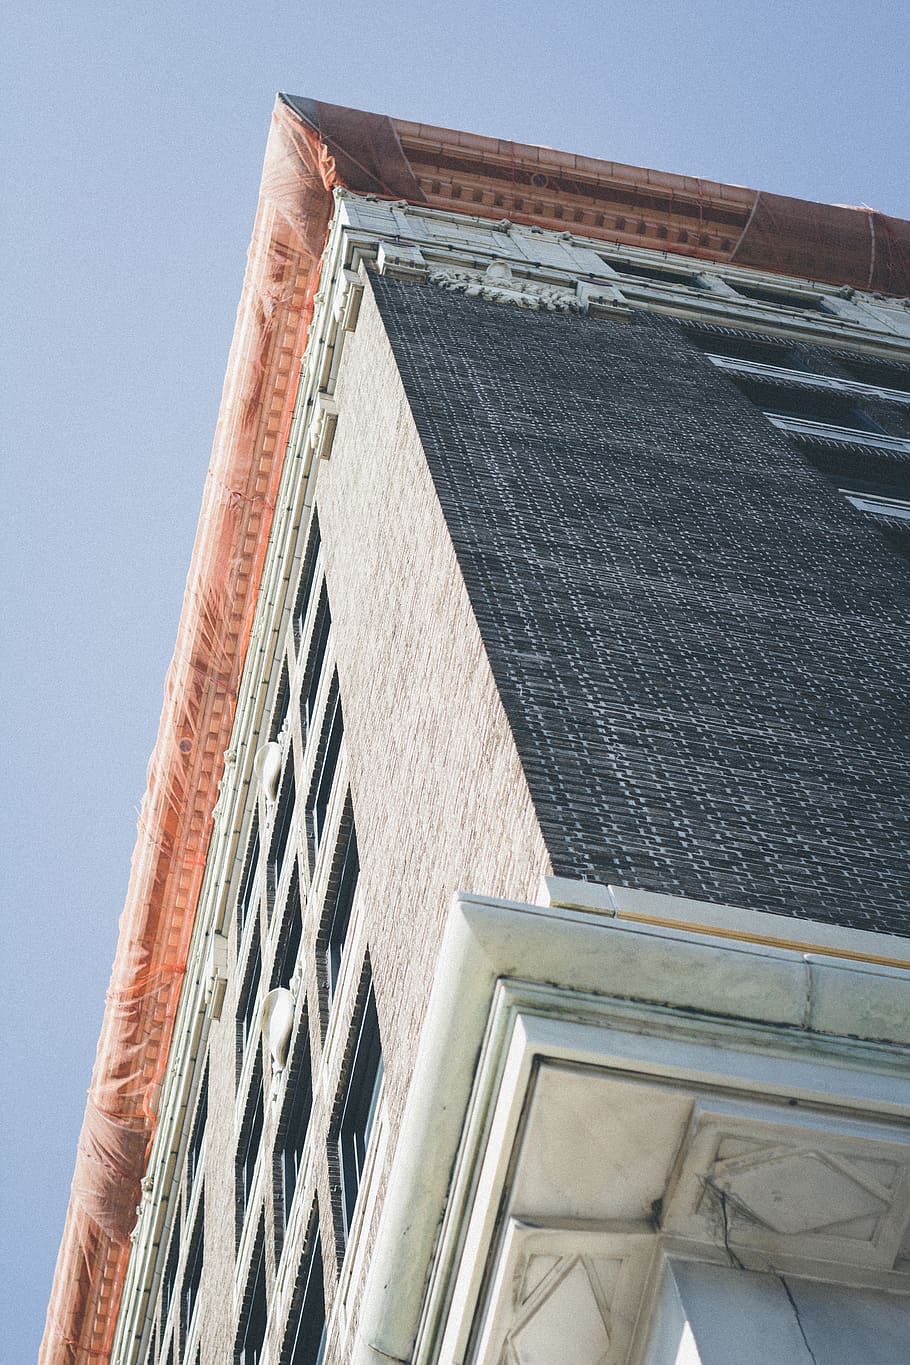 wilmington, united states, brick, sky, building, history, downtown, HD wallpaper